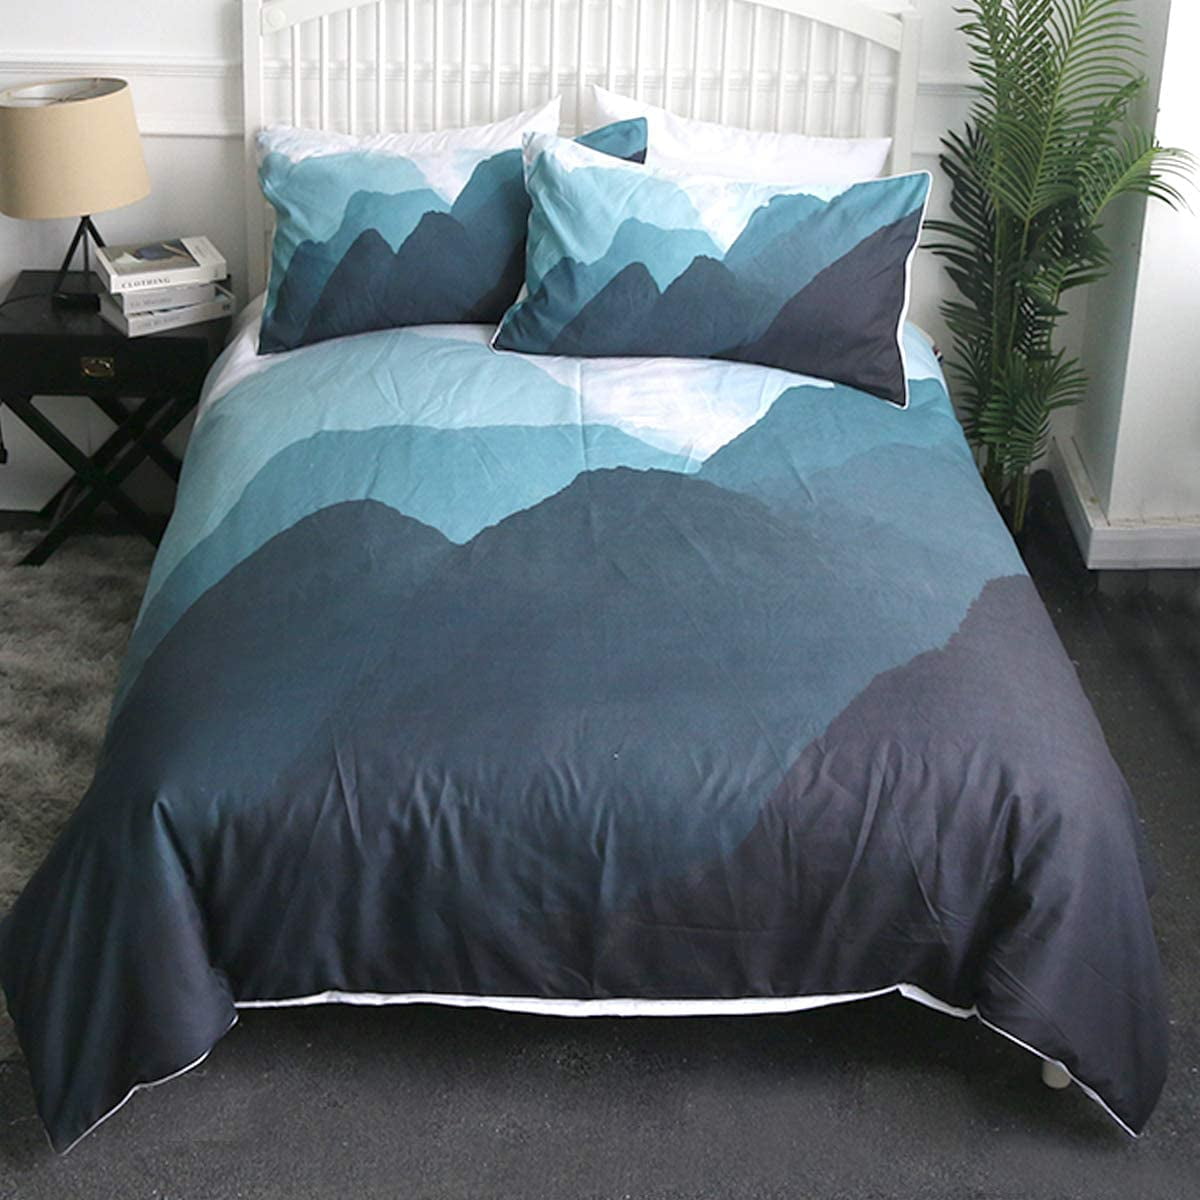 Details about   Full or Queen Size Comforter Set 4pc Sham Pillow Machine Washable Pop Color Bed 